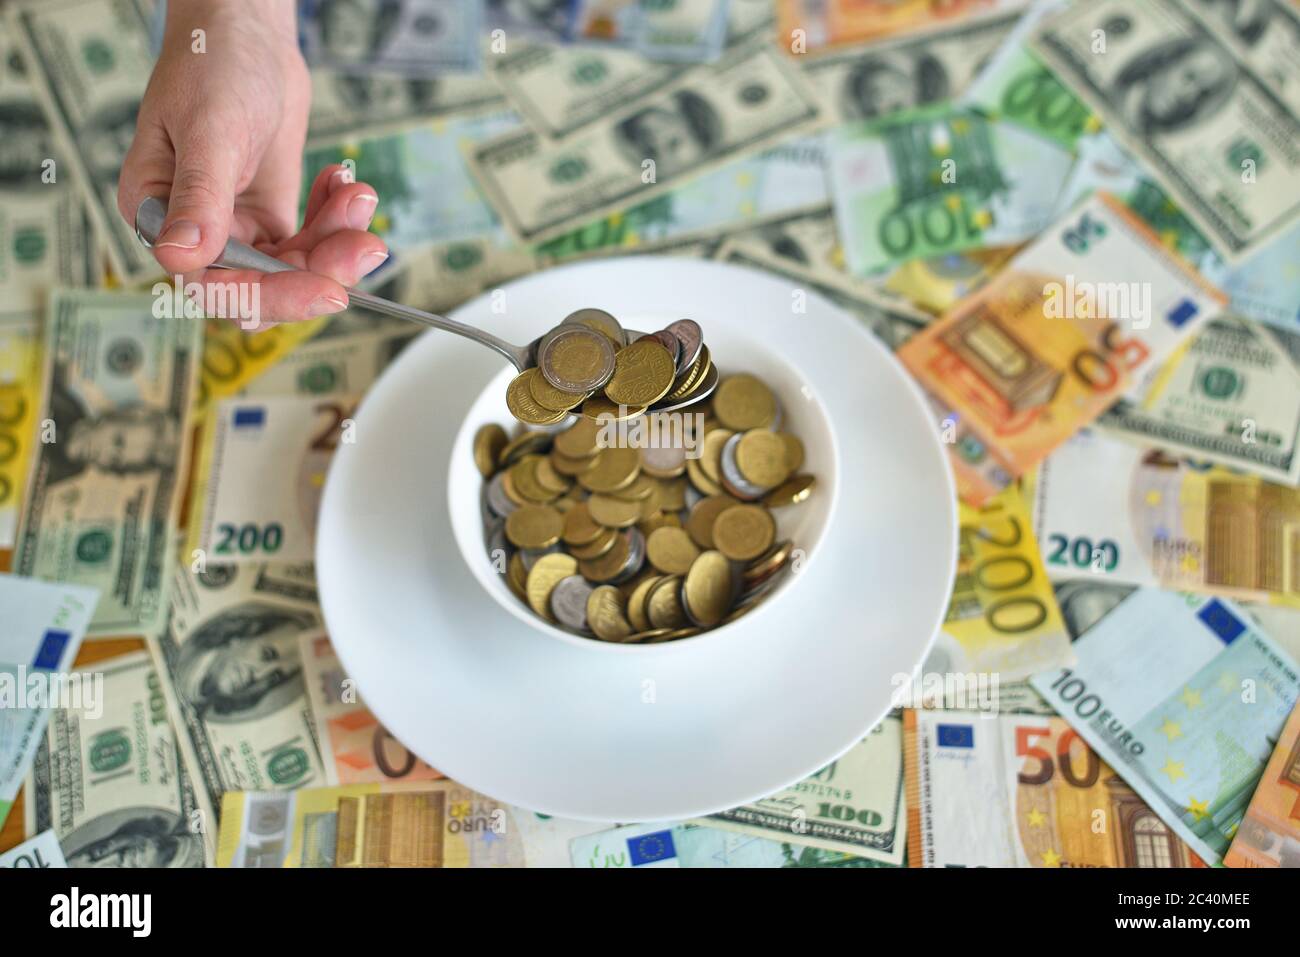 plate with coins. euro and dollar bills on the table Stock Photo